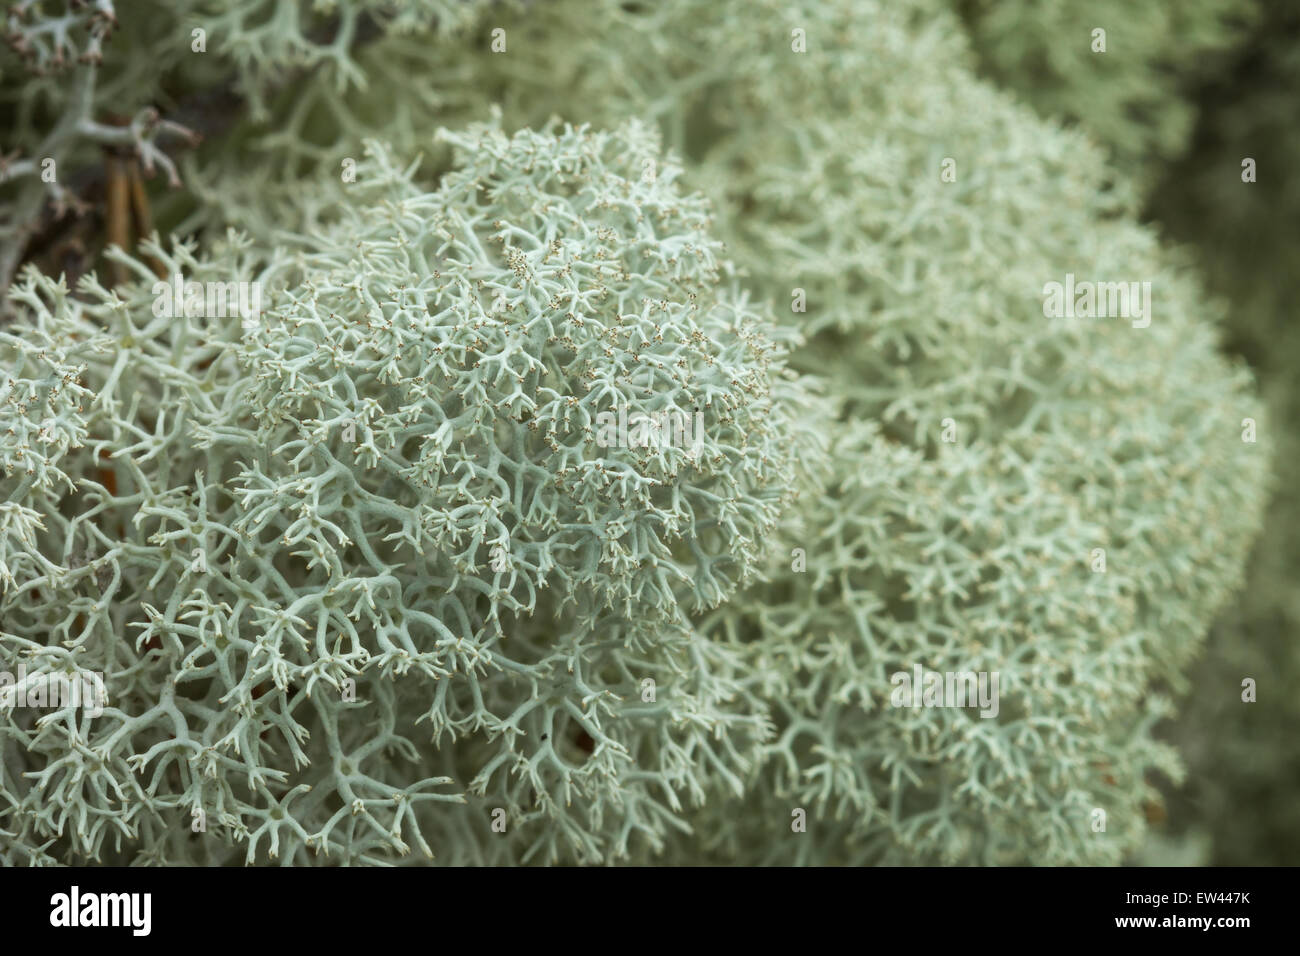 Macro close-up of mounds of Star-tipped Reindeer Lichen (Cladina stellaris) (or Northern Reindeer Lichen or Star Reindeer Lichen Stock Photo